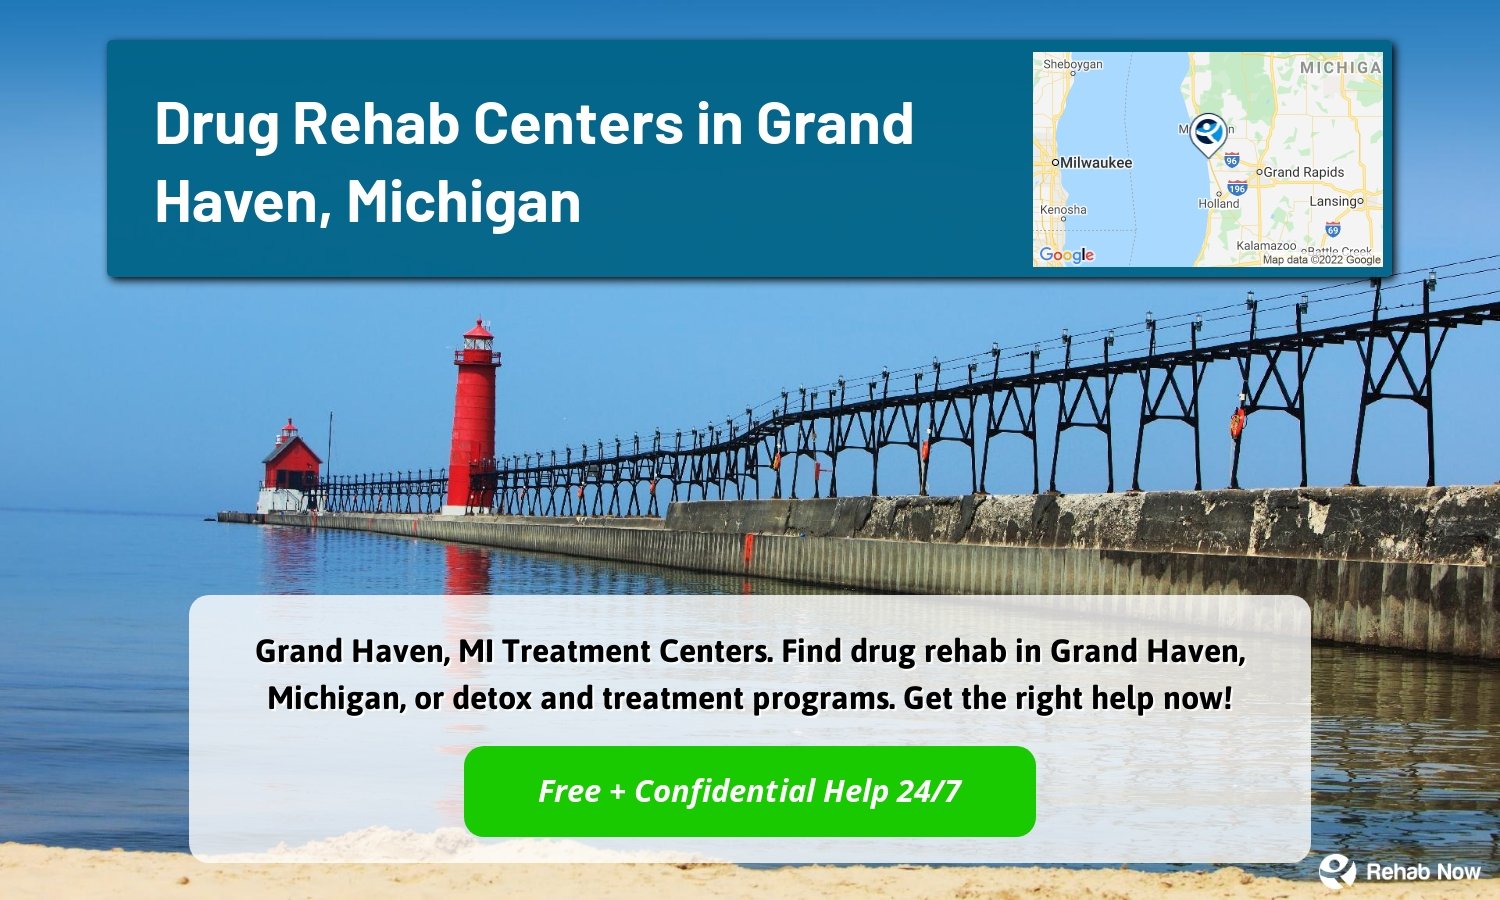 Grand Haven, MI Treatment Centers. Find drug rehab in Grand Haven, Michigan, or detox and treatment programs. Get the right help now!